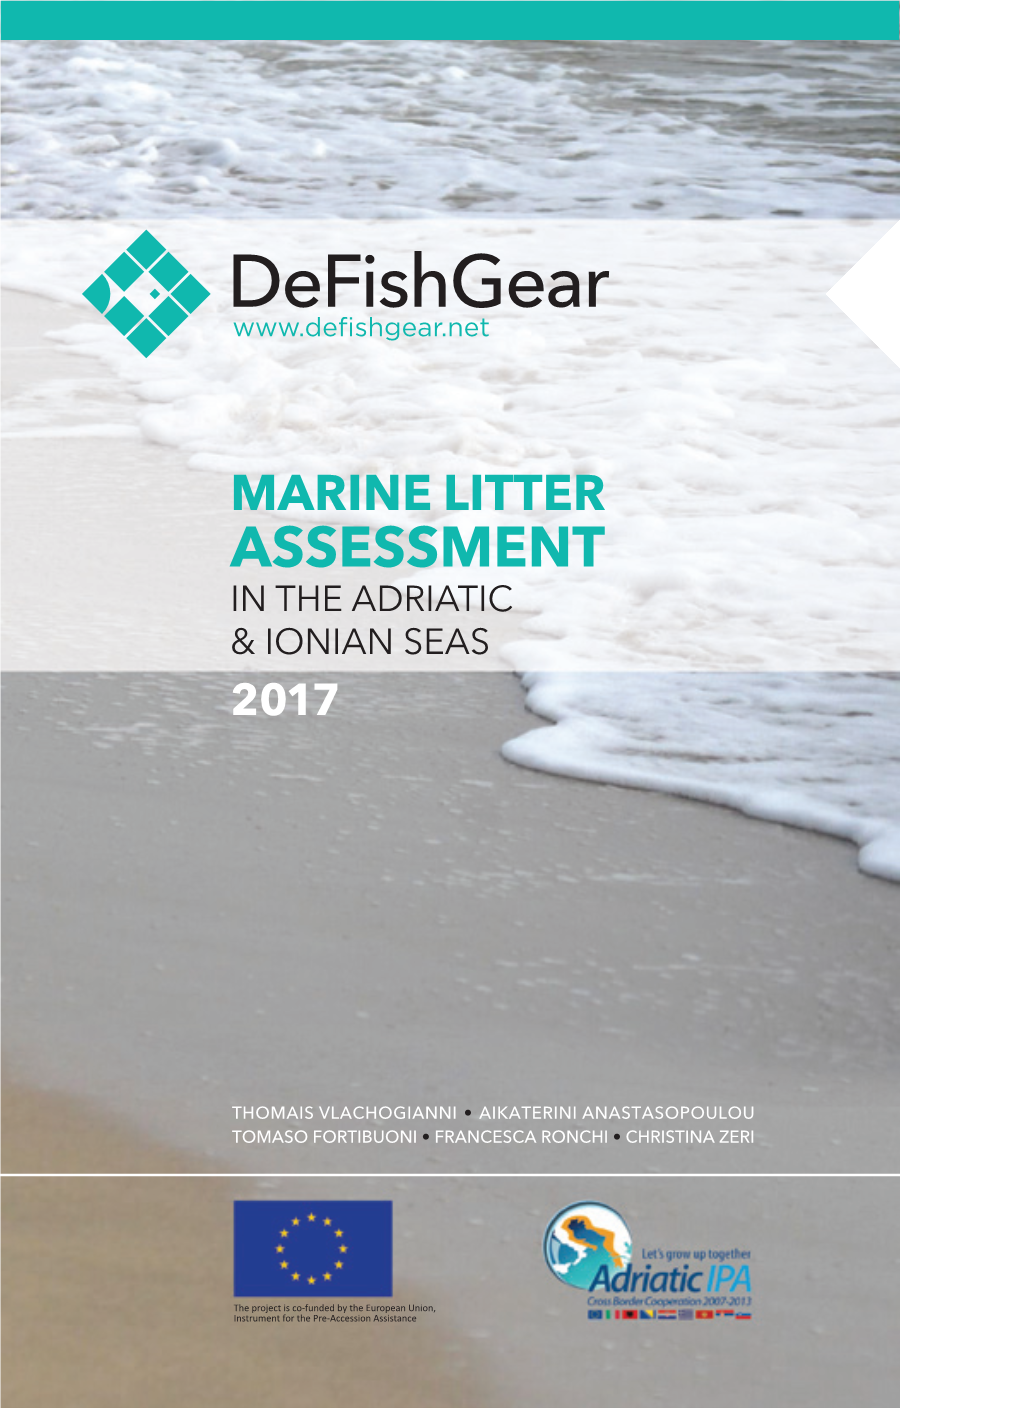 Marine Litter Assessment in the Adriatic & Ionian Seas 2017